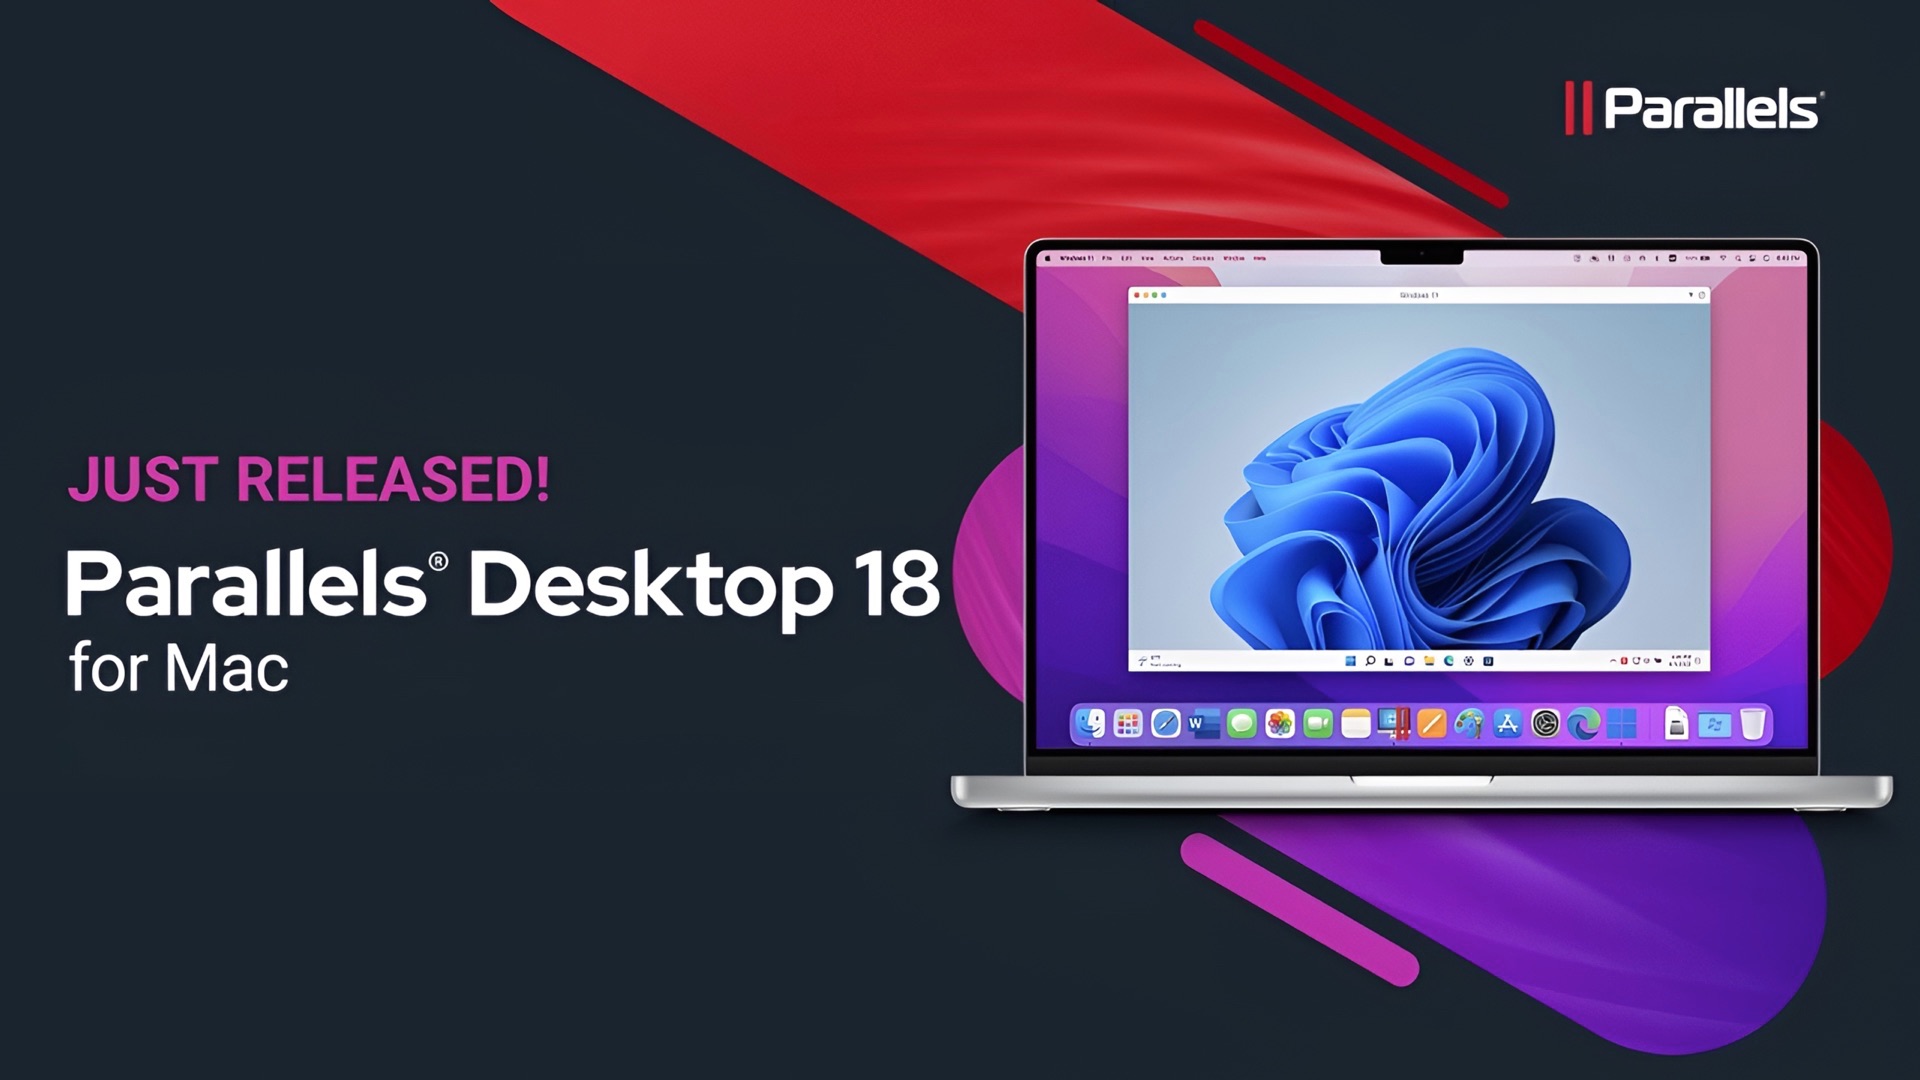 Whats New in Parallels Desktop 18 for Mac